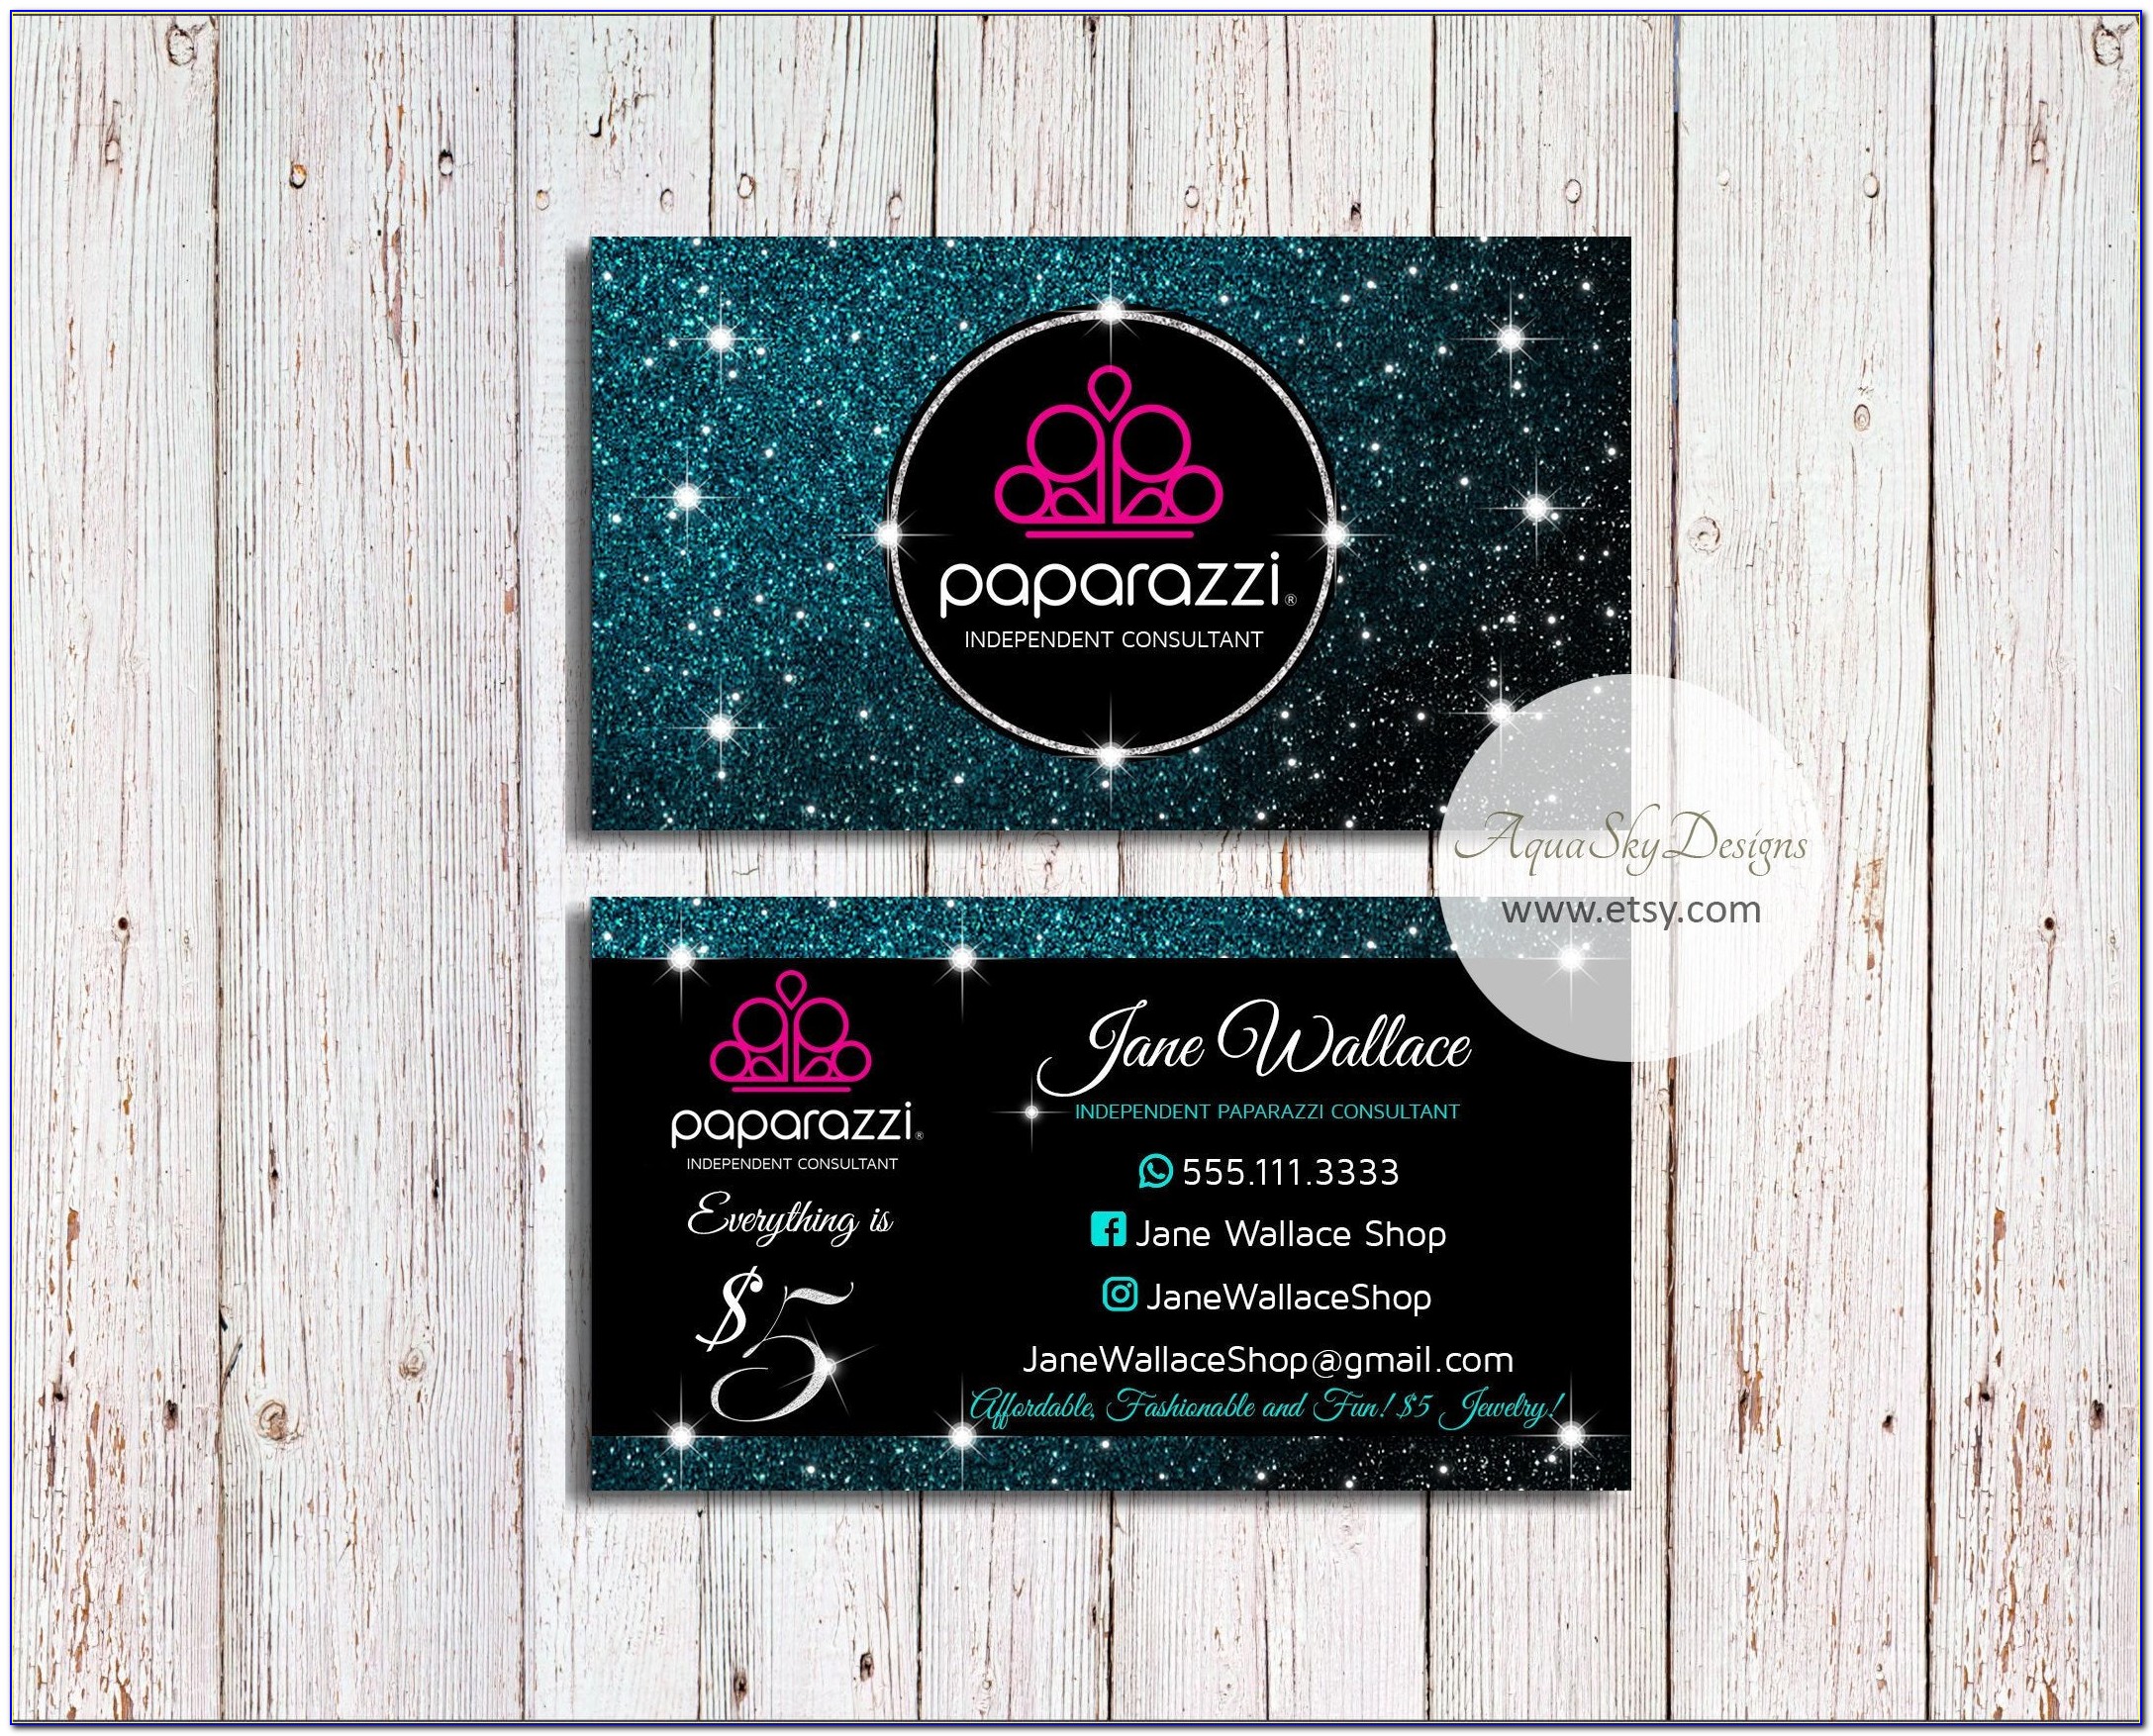 Face Painting Business Cards Design